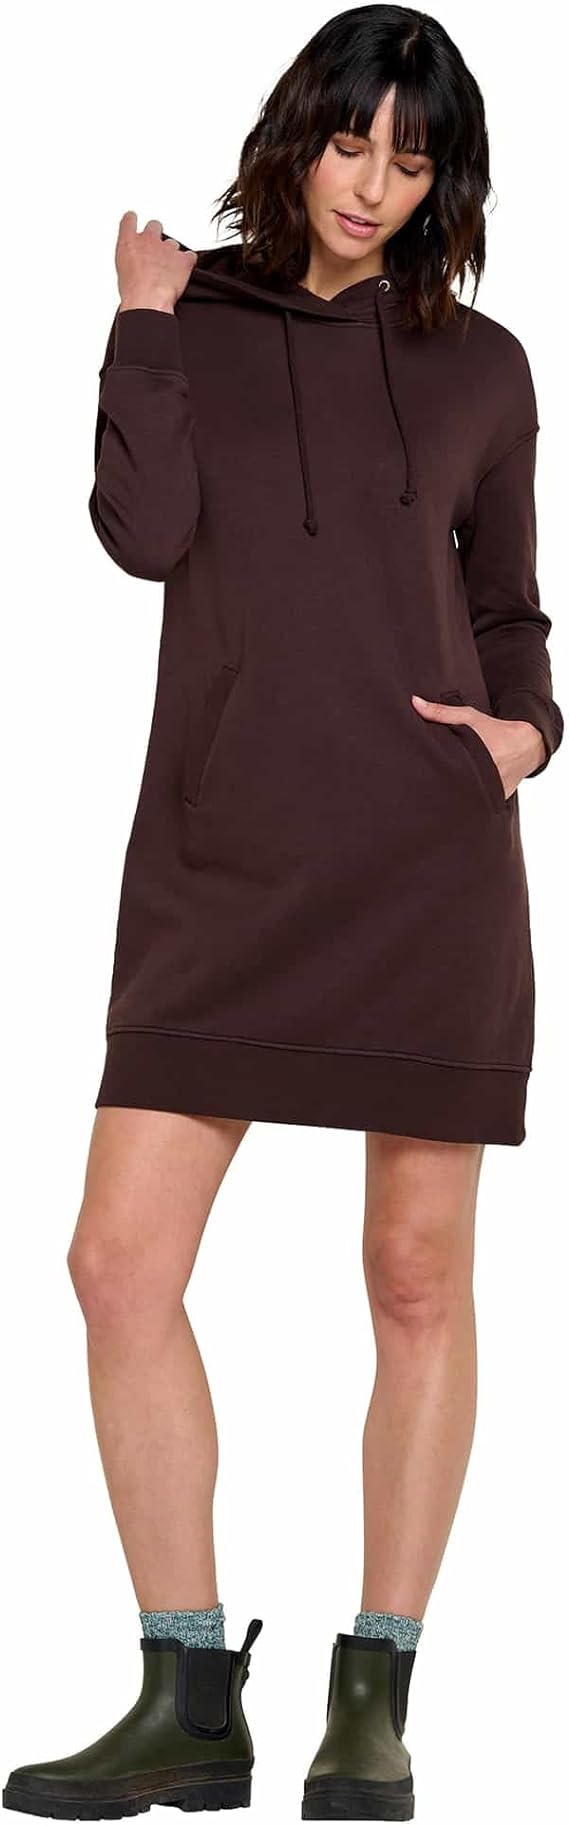 Toad&Co Organic Cotton and Hemp Daybreaker Hooded Dress